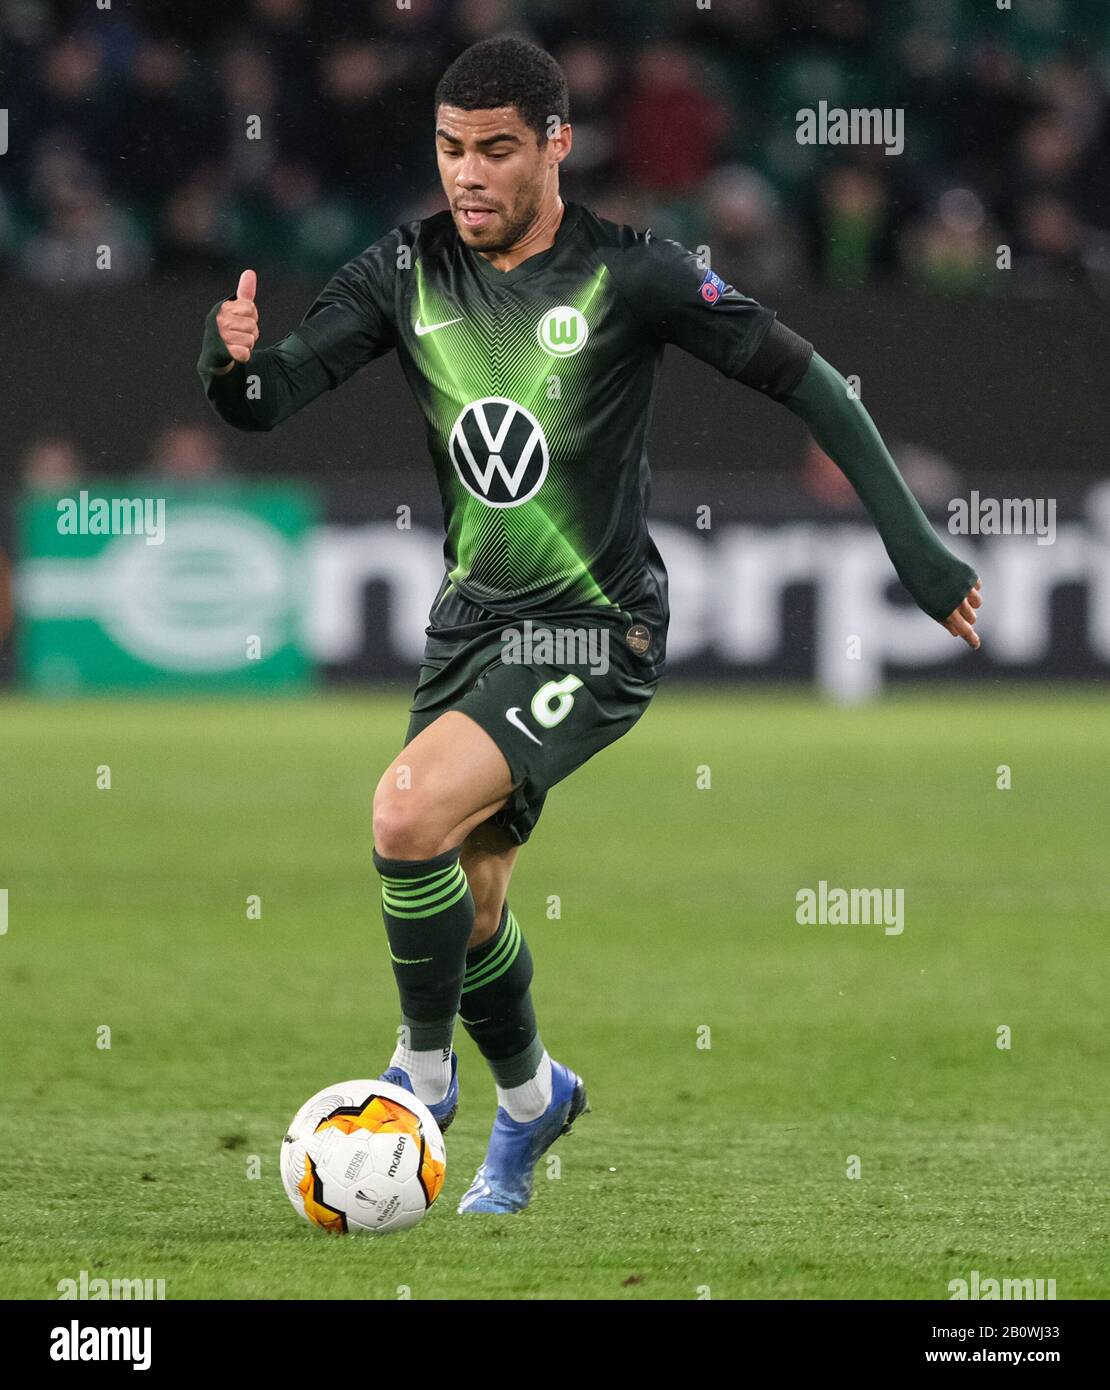 Wolfsburg, Germany. 20th Feb, 2020. Football: Europa League, VfL Wolfsburg - Malmö FF, knockout rounds, intermediate round, first legs in the Volkswagen Arena Wolfsburg's Paulo Otavio is on the ball. Credit: Peter